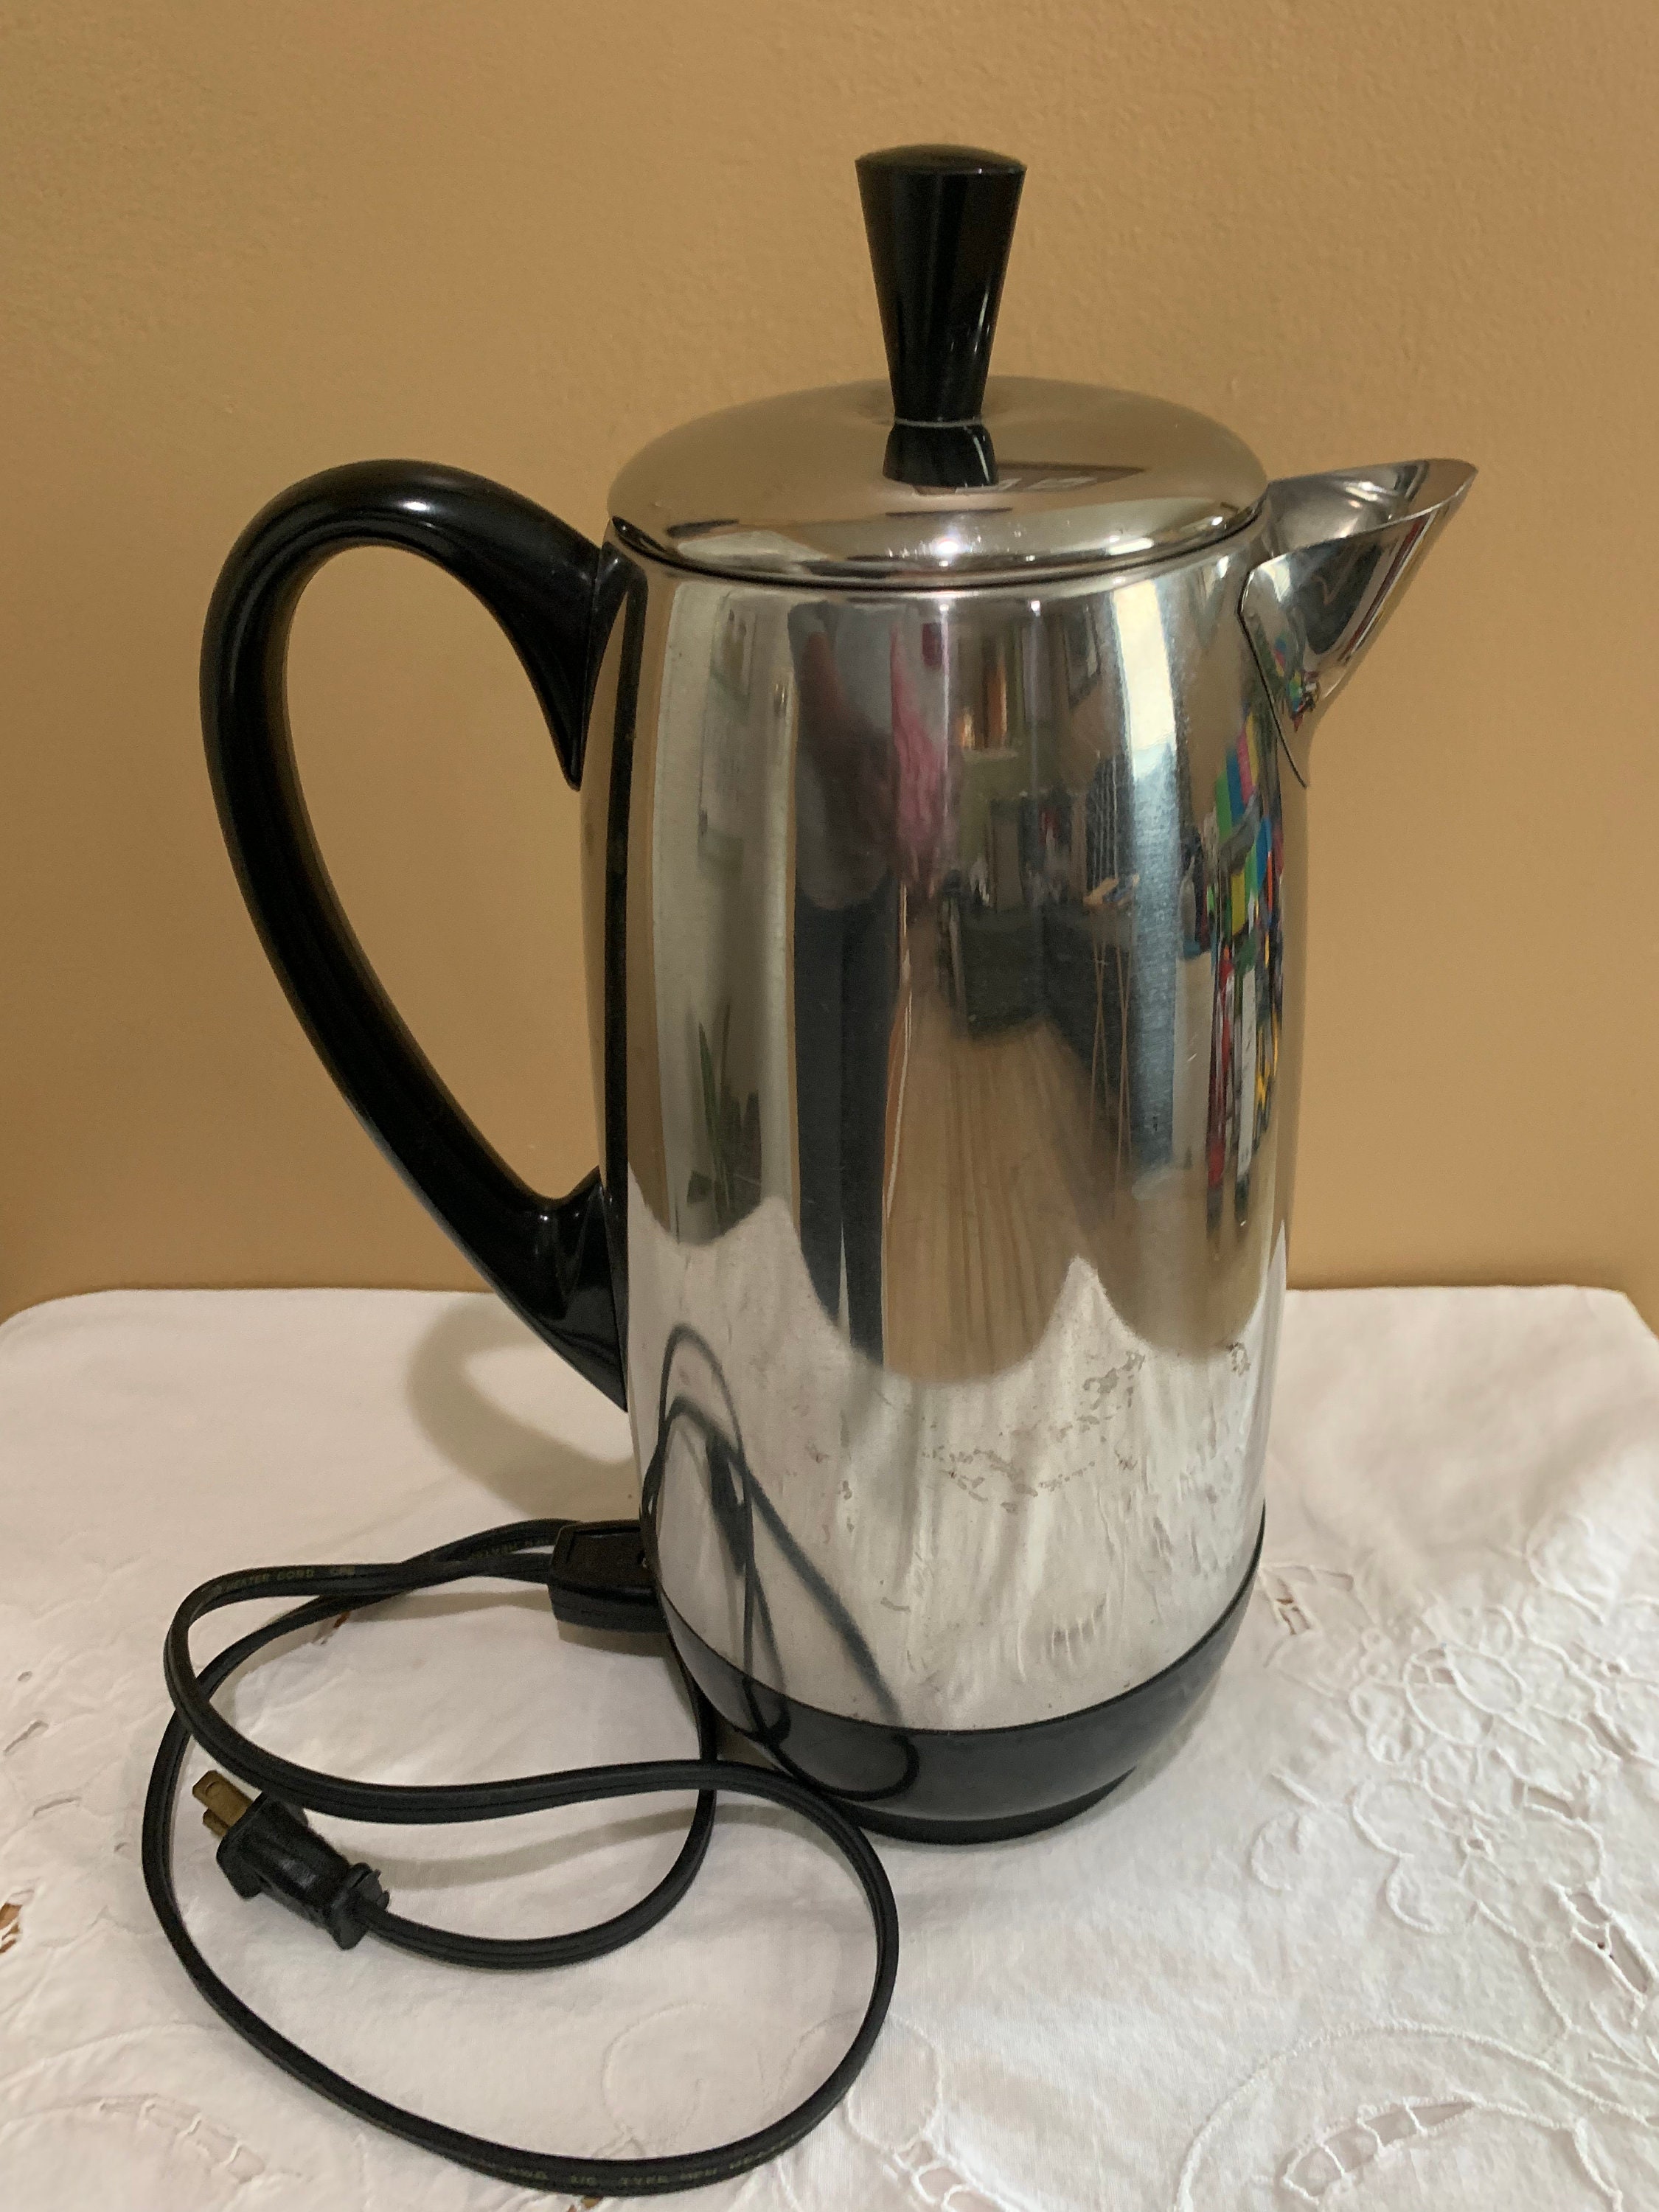 Vintage Farberware 12 Cup Electric Percolator Coffee Pot Stainless